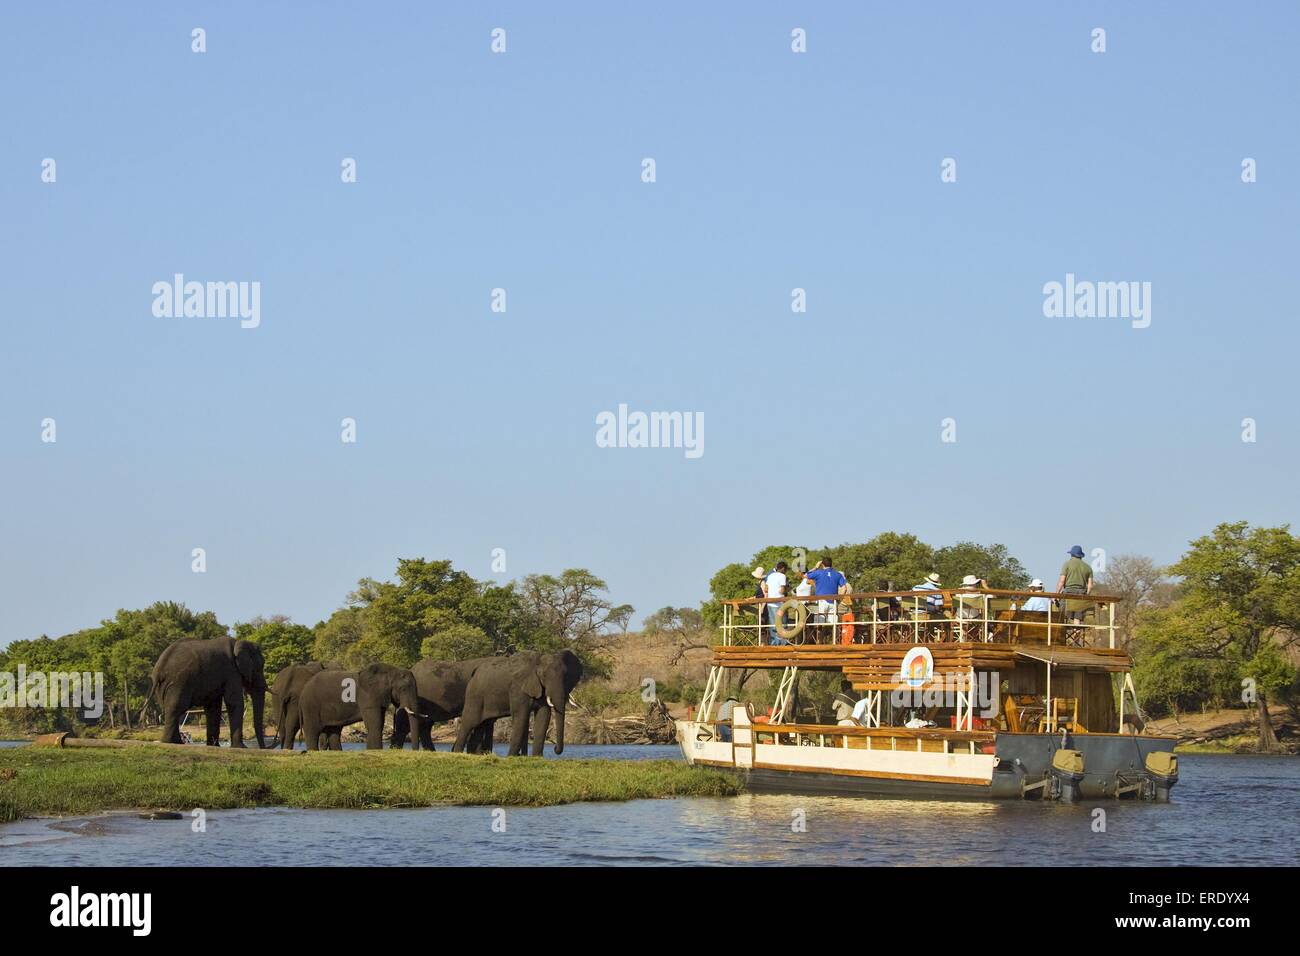 African Elephants and touristboat Stock Photo